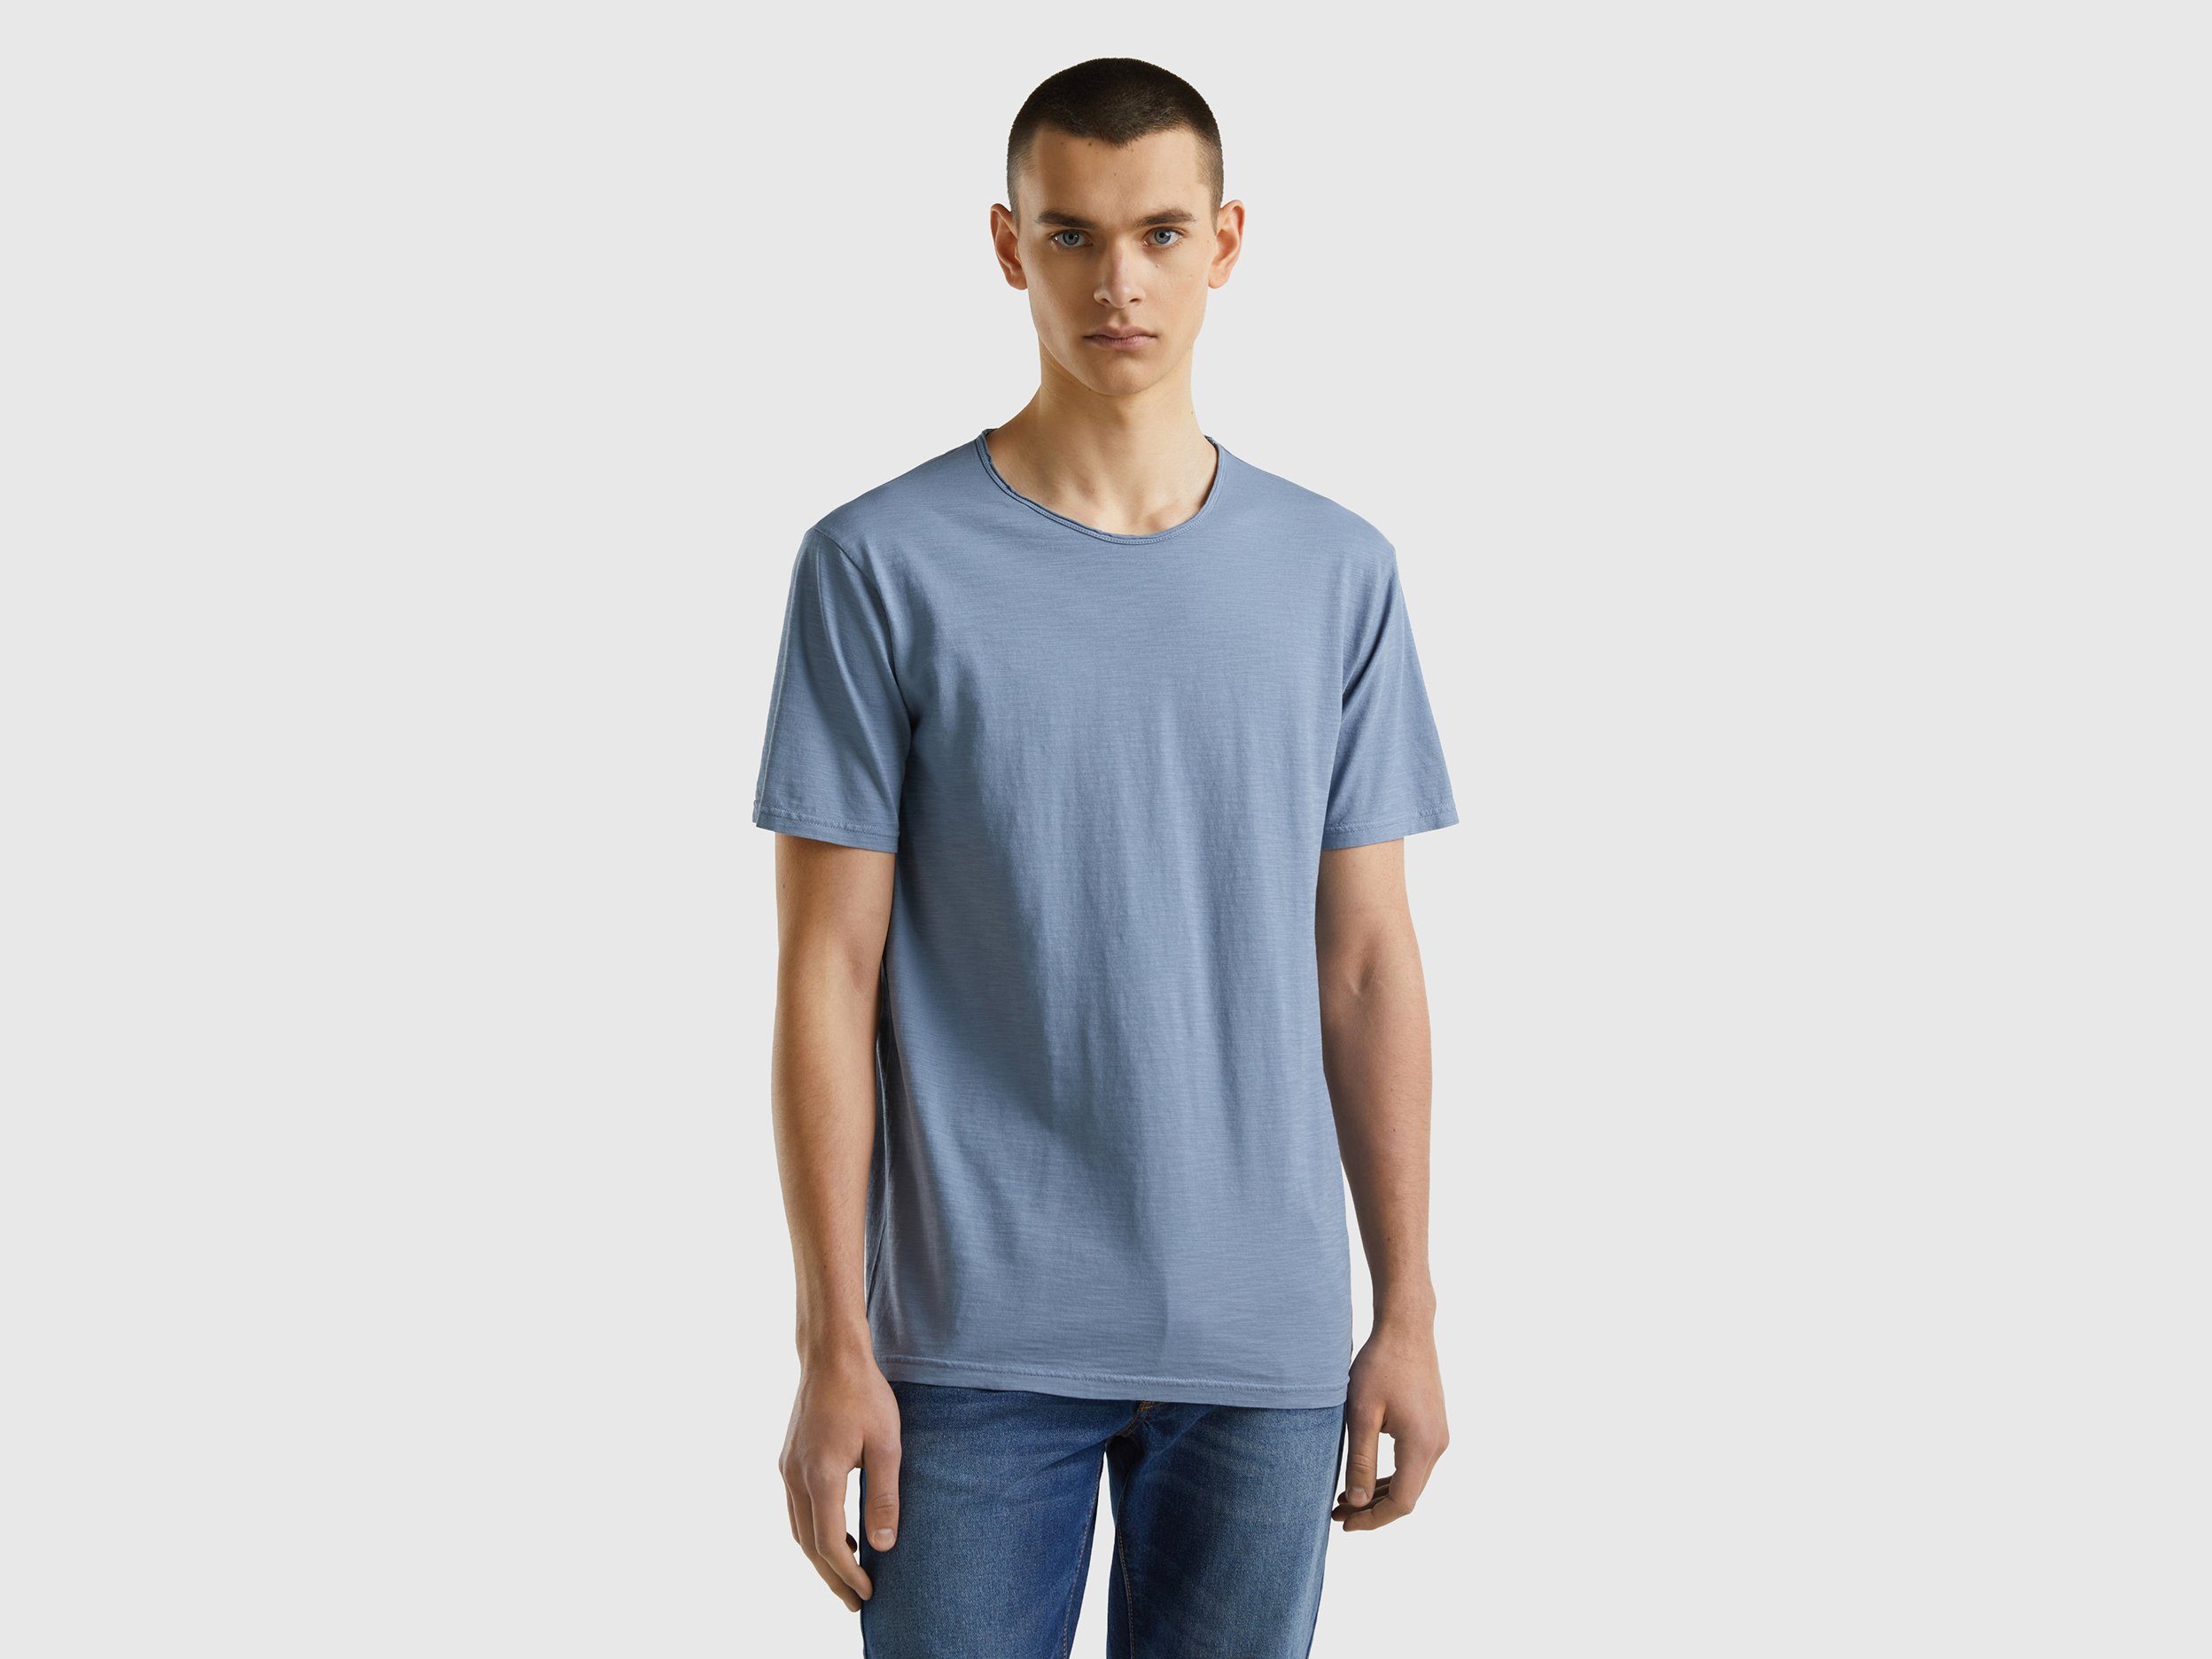 United Colors of Benetton T-Shirt in gerader Basic-Form